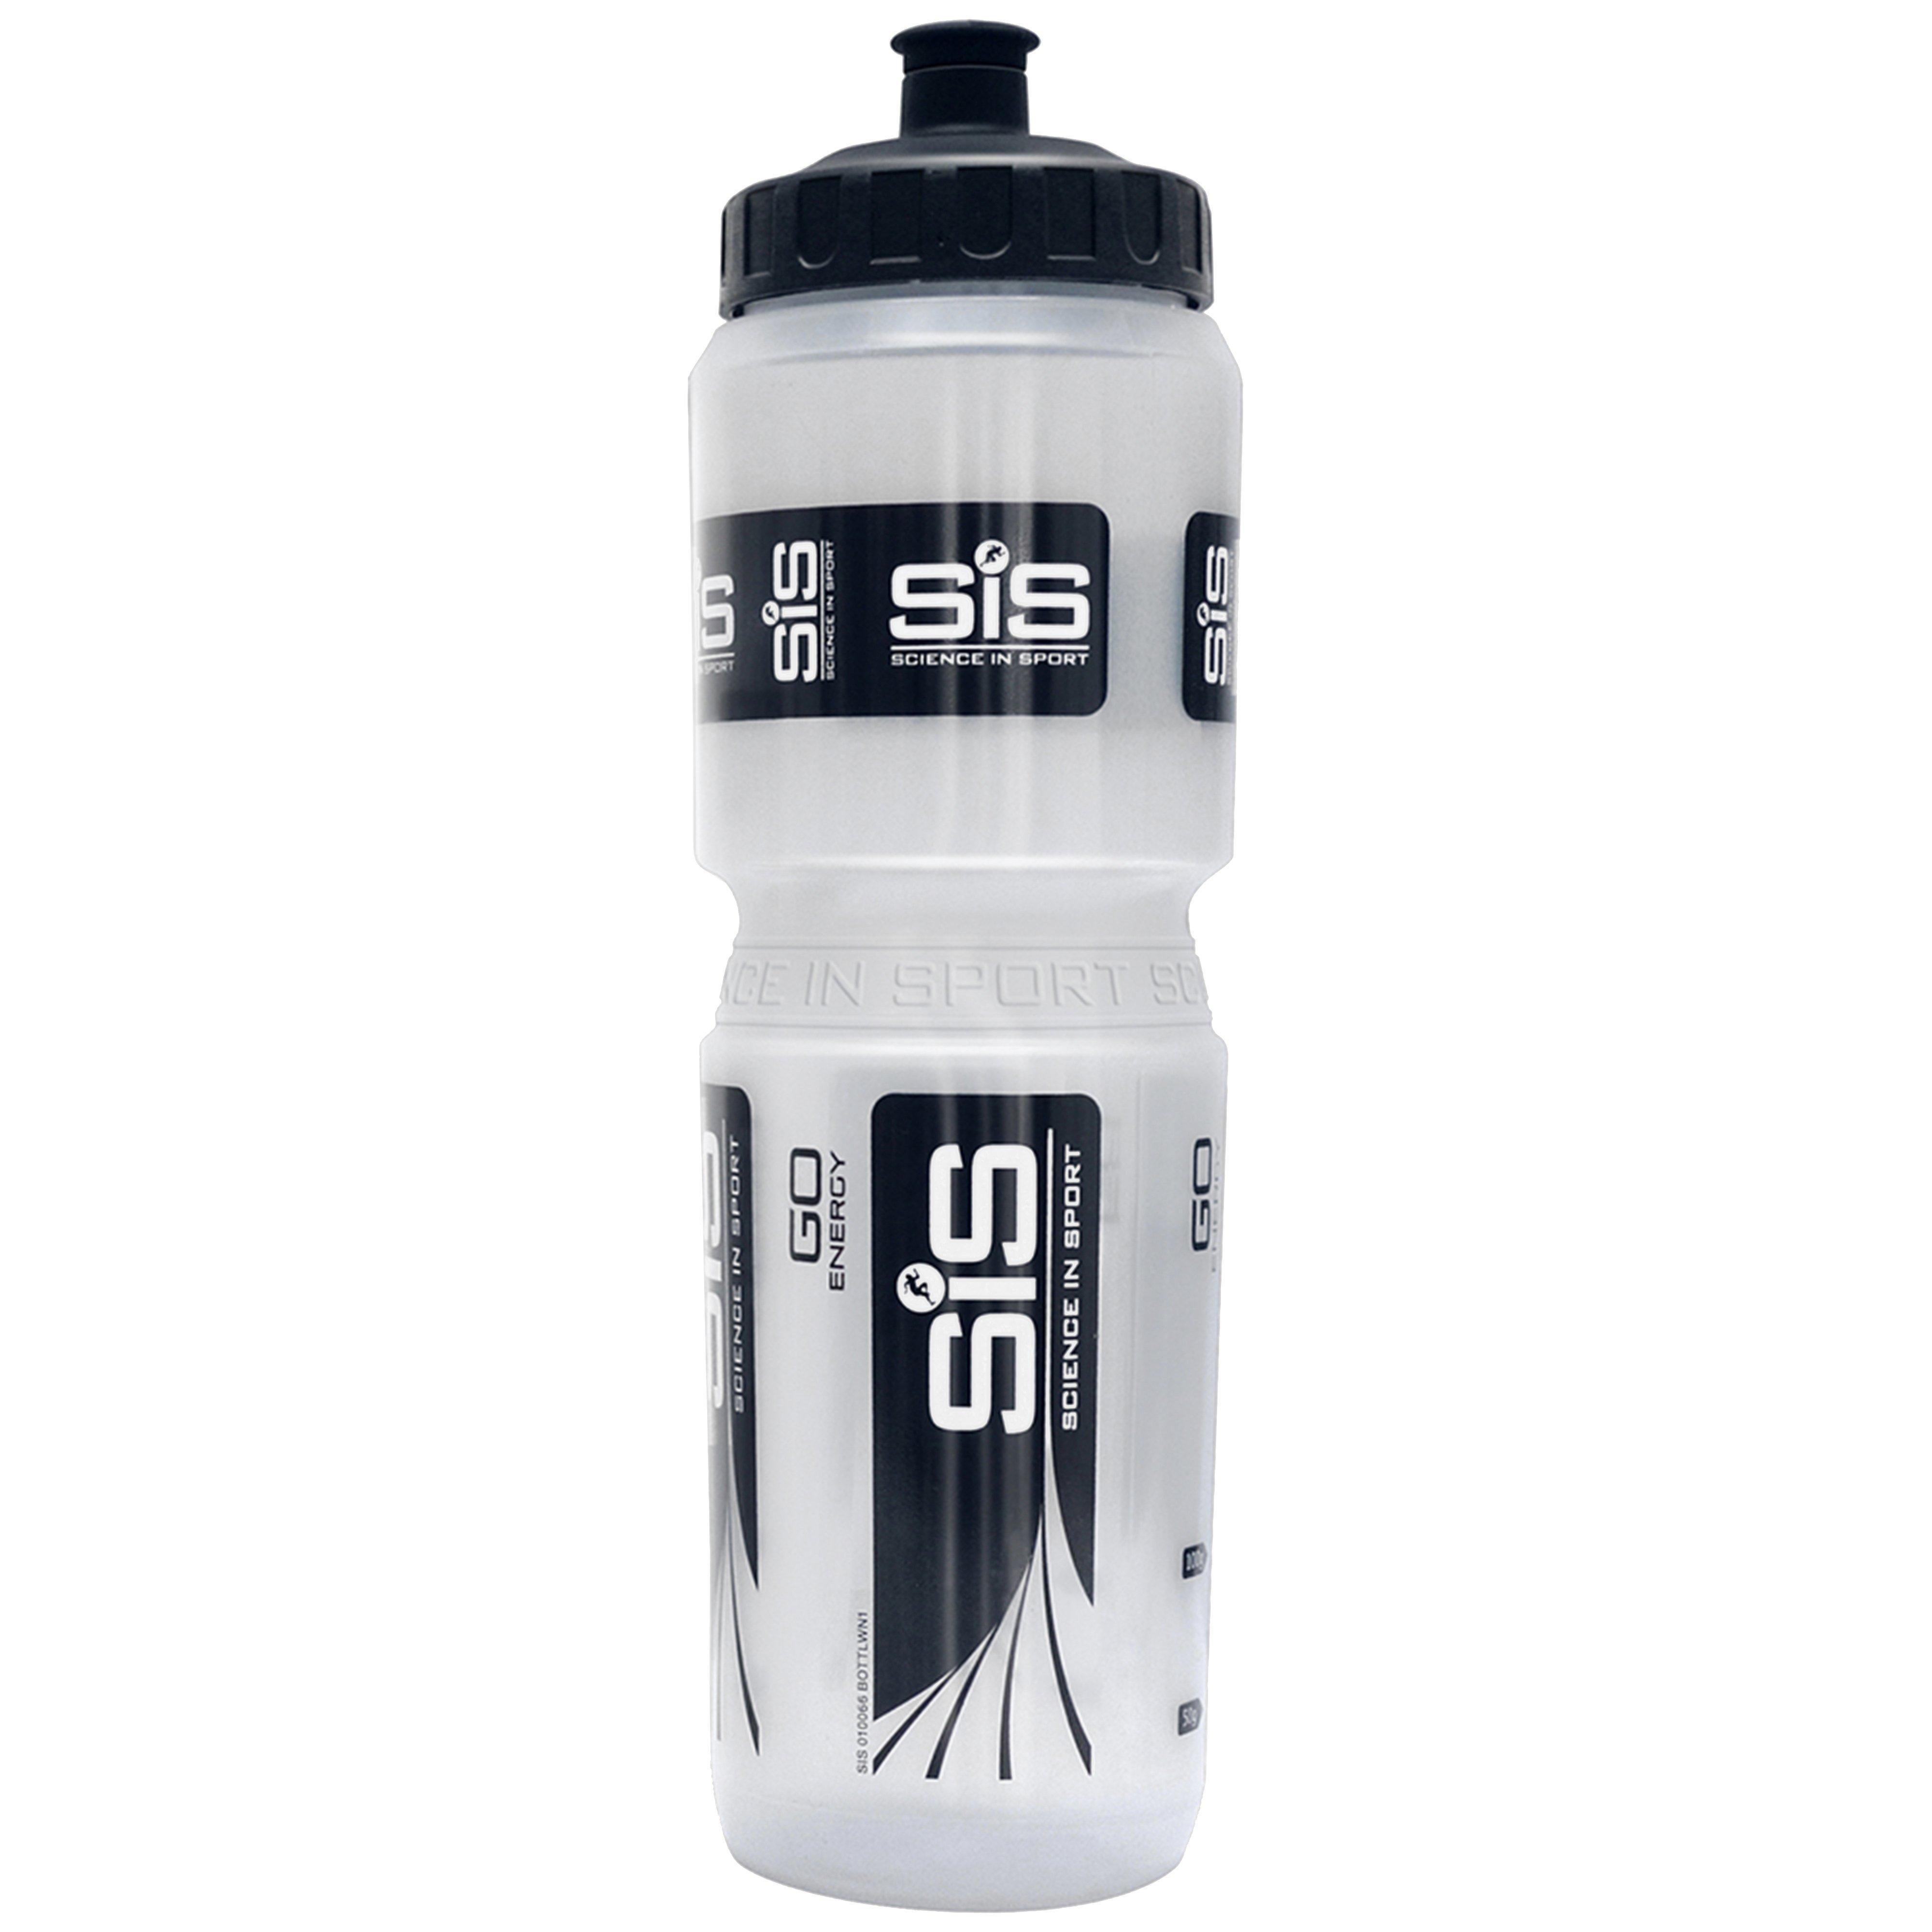 Sis 1000ml Sports Bottle - Wide Neck Review